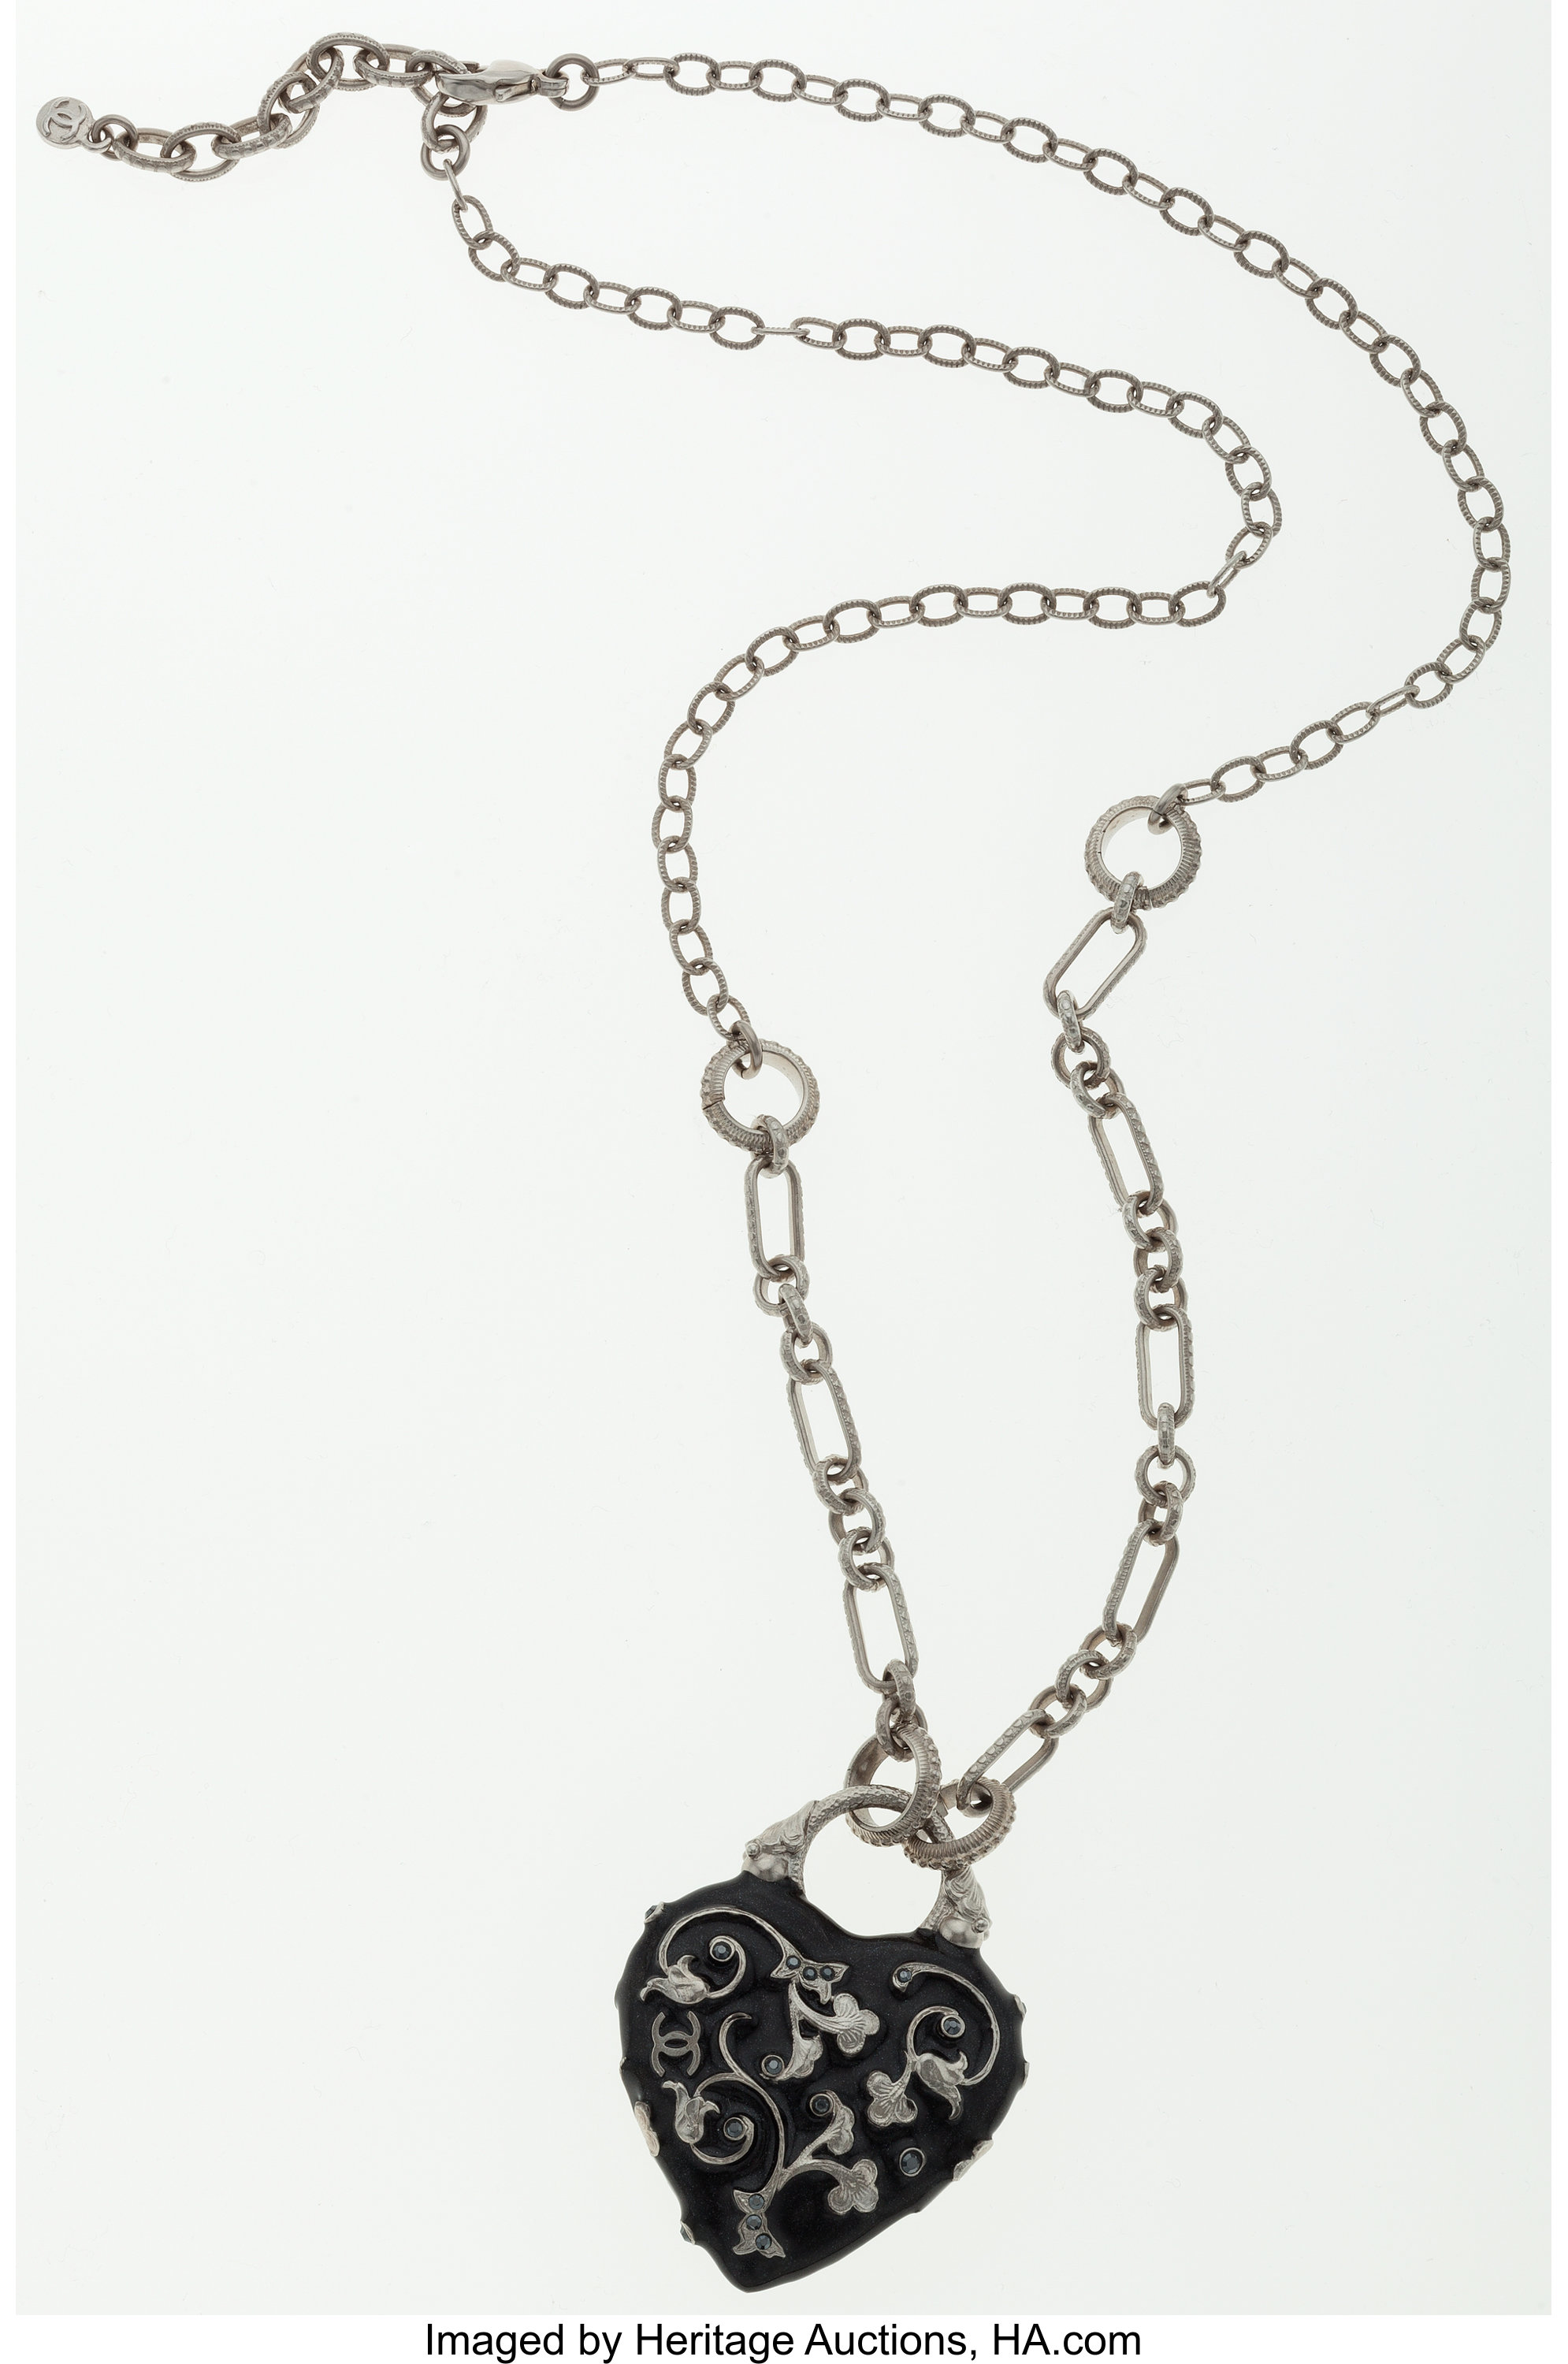 Chanel Black Heart Motif Pendant with Silver Chain Necklace